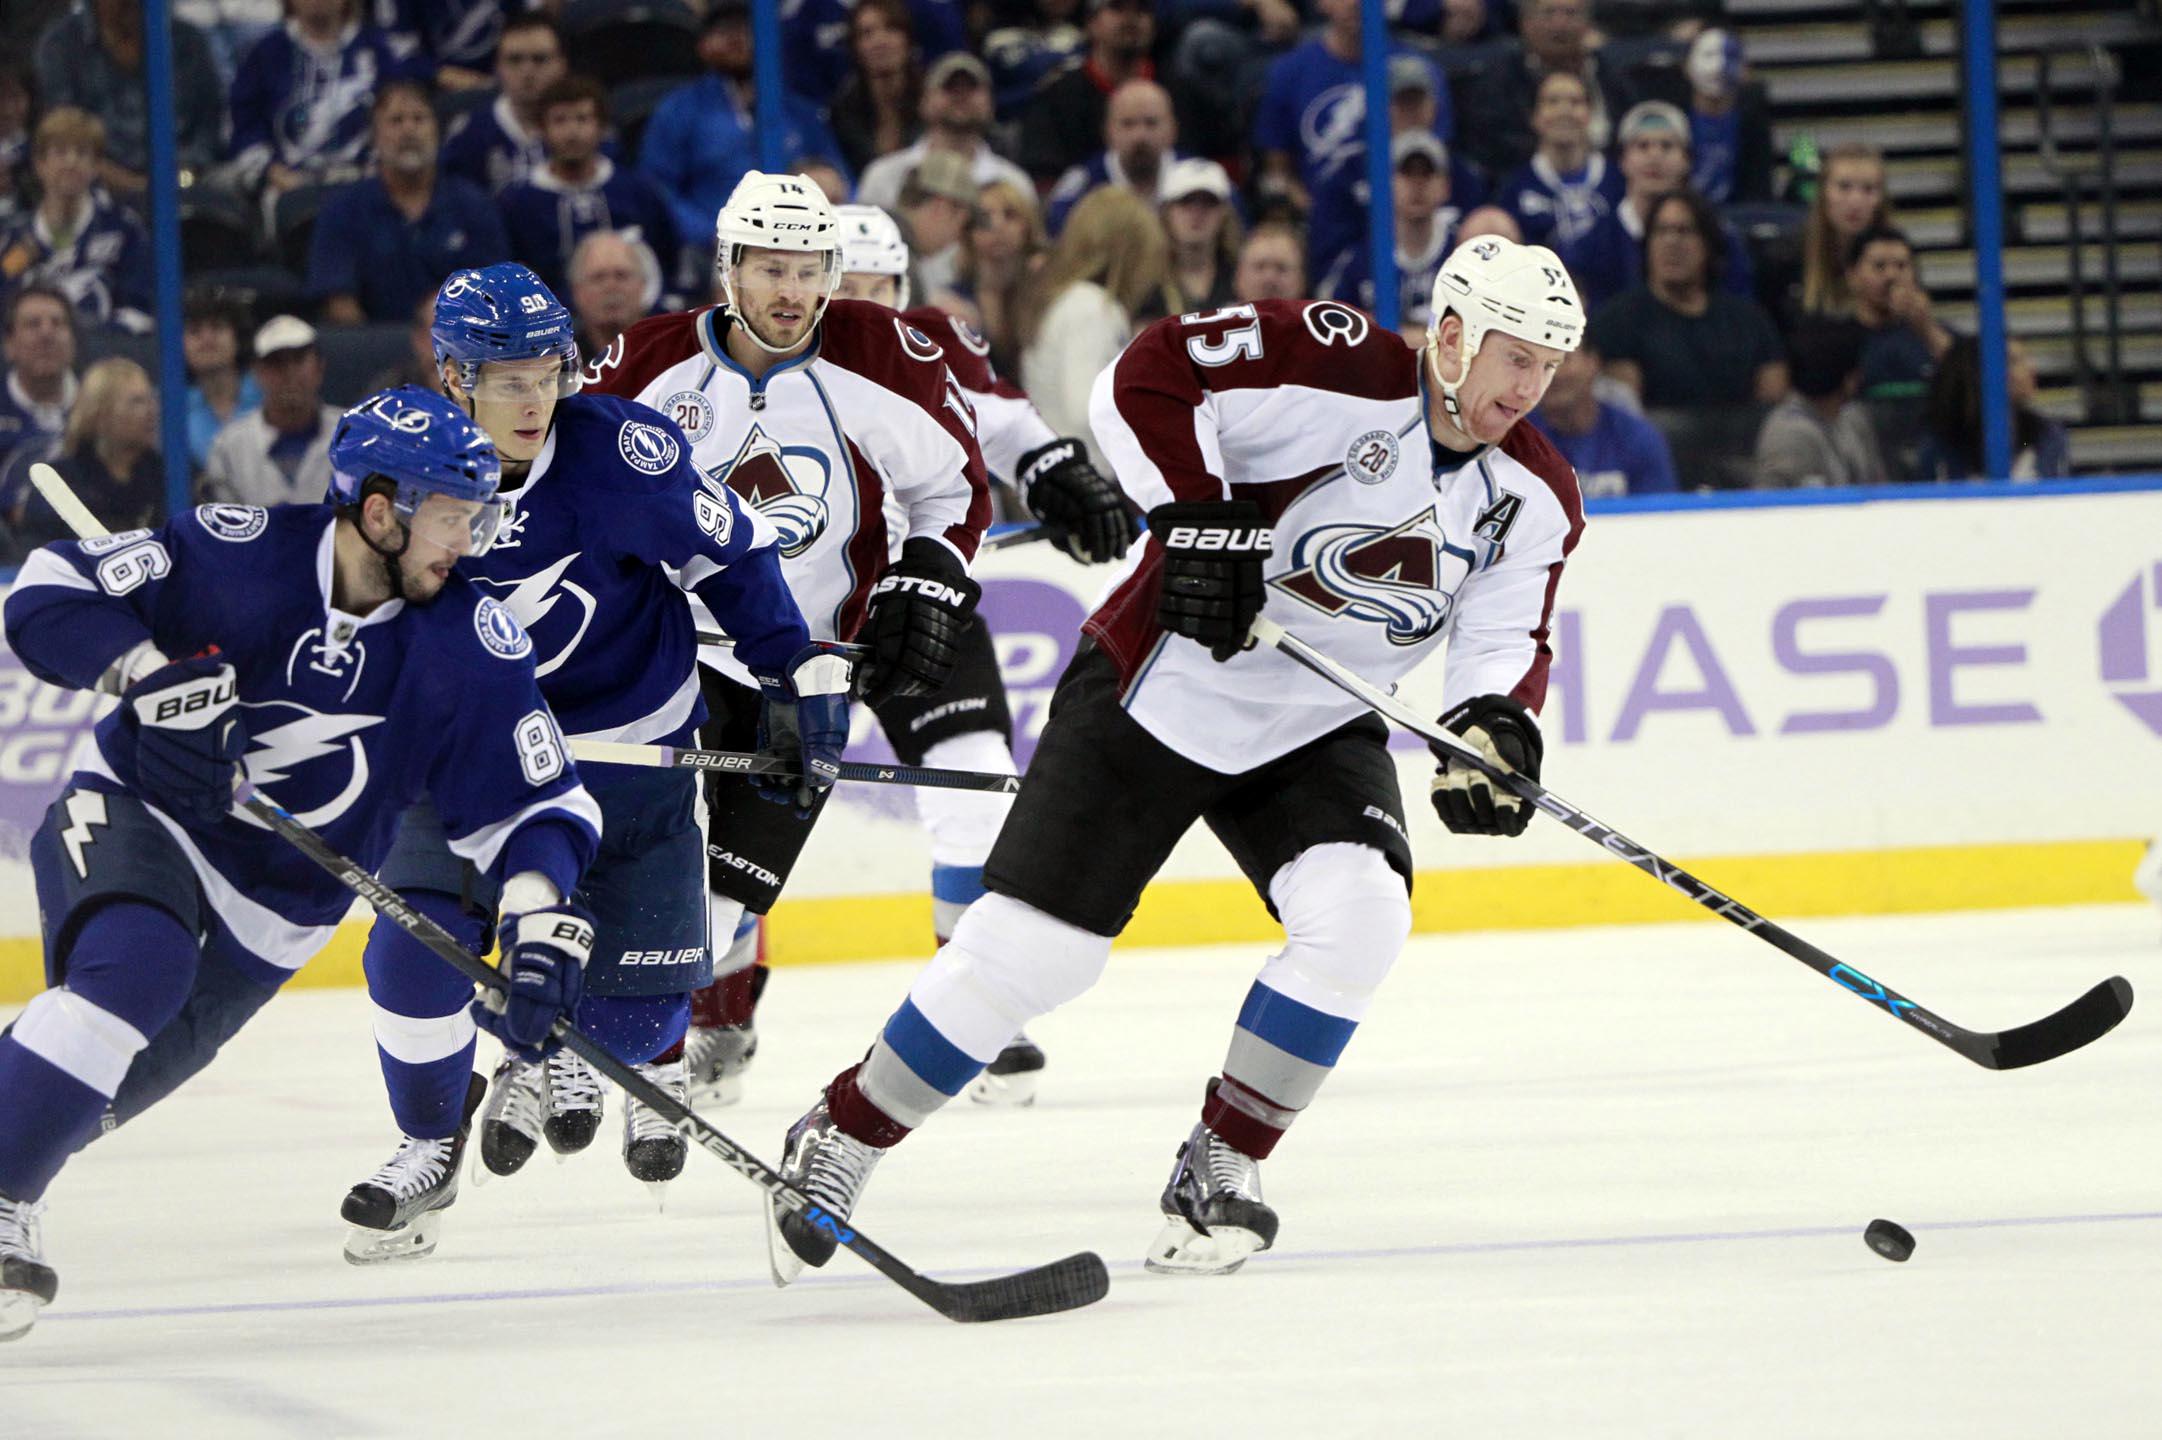 Avalanche vs Lightning Predictions, Odds and Schedule for Stanley Cup Finals on FanDuel Sportsbook FanDuel Research